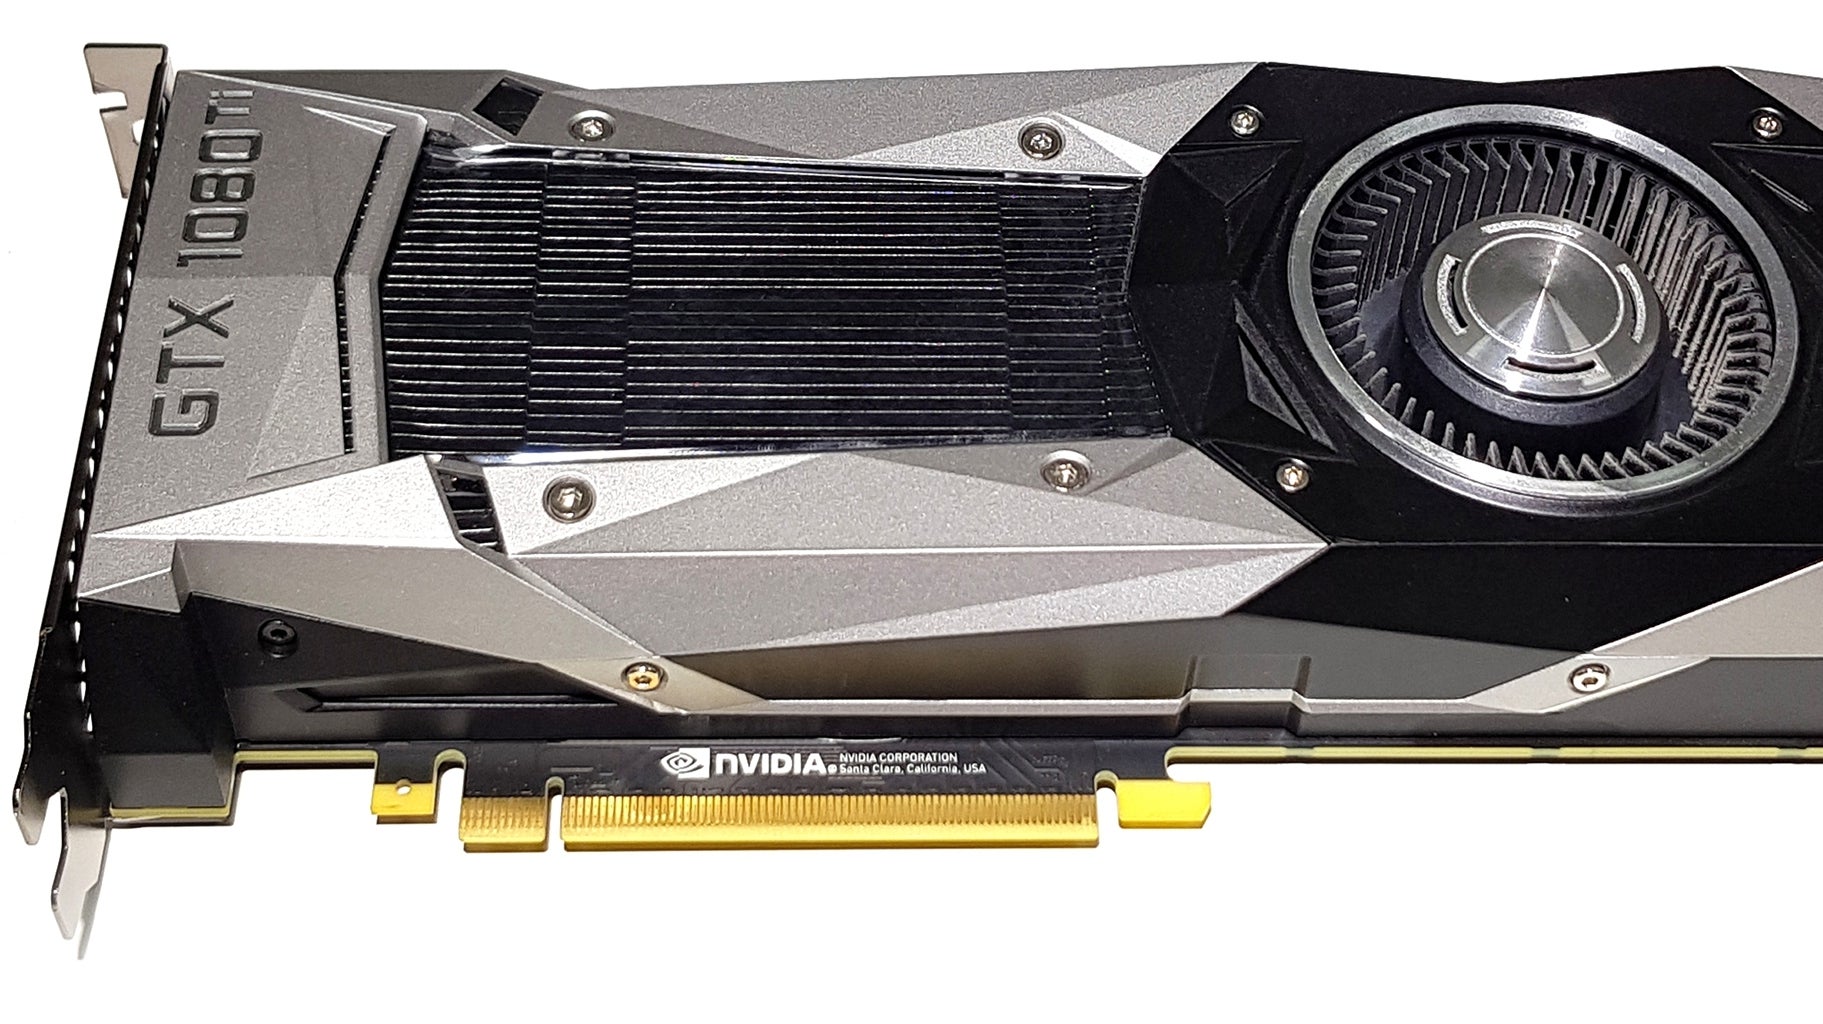 Nvidia GeForce GTX 1080 Ti benchmarks: 4K/60 is within reach |